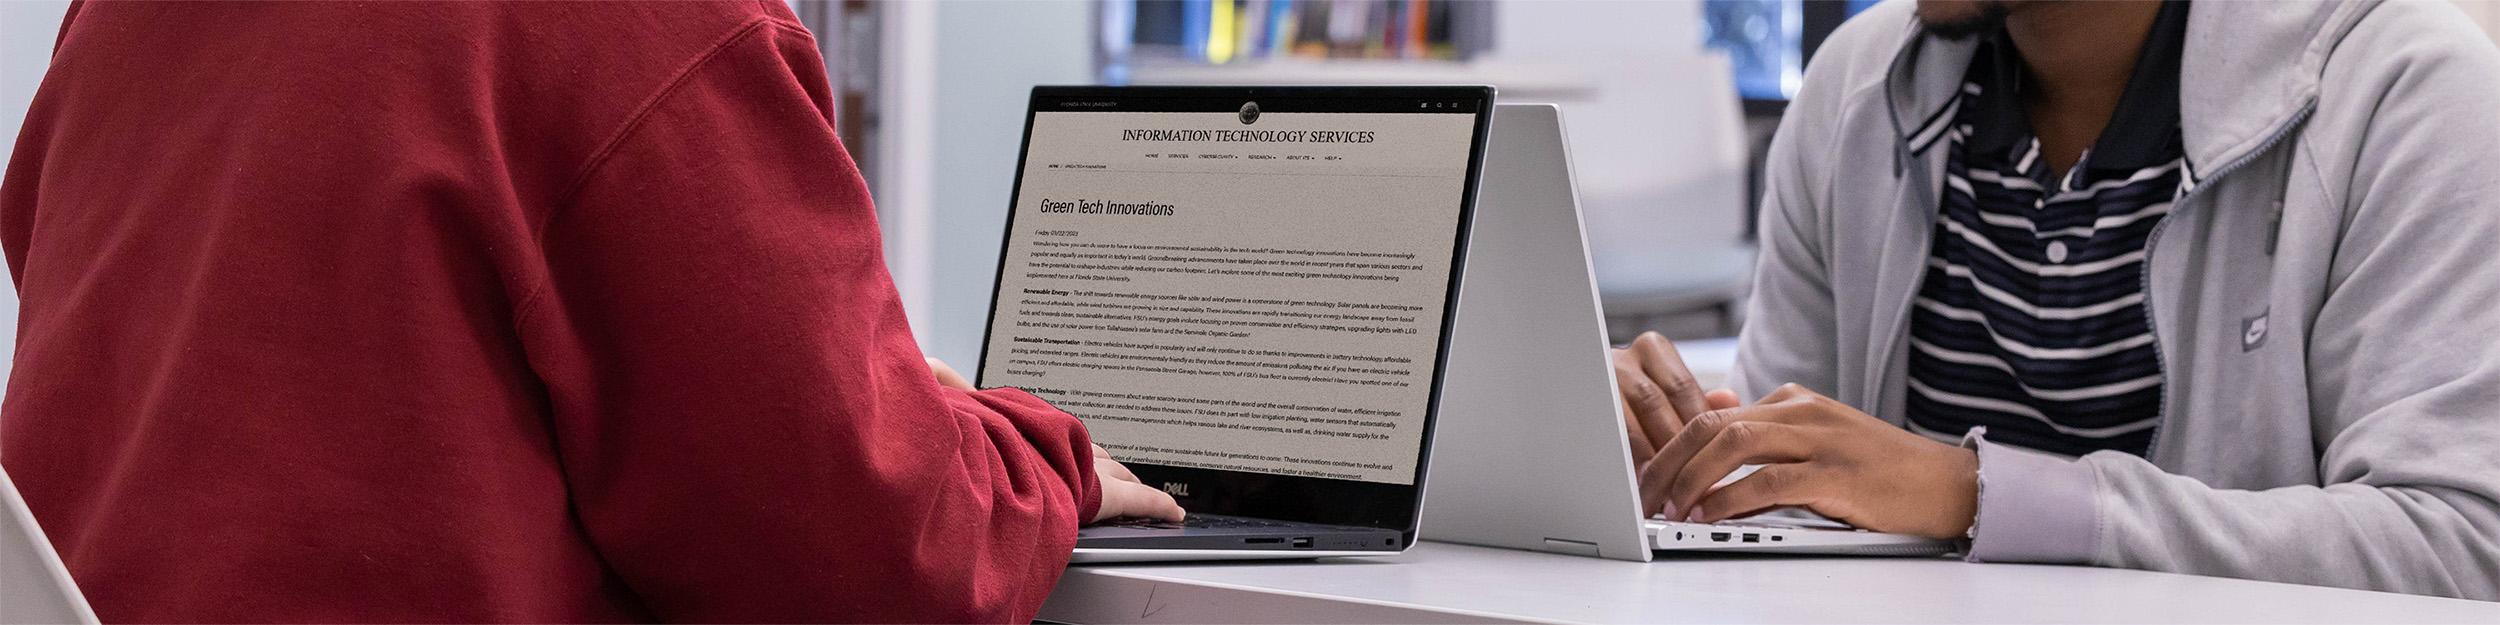 Student reading ITS news article on laptop